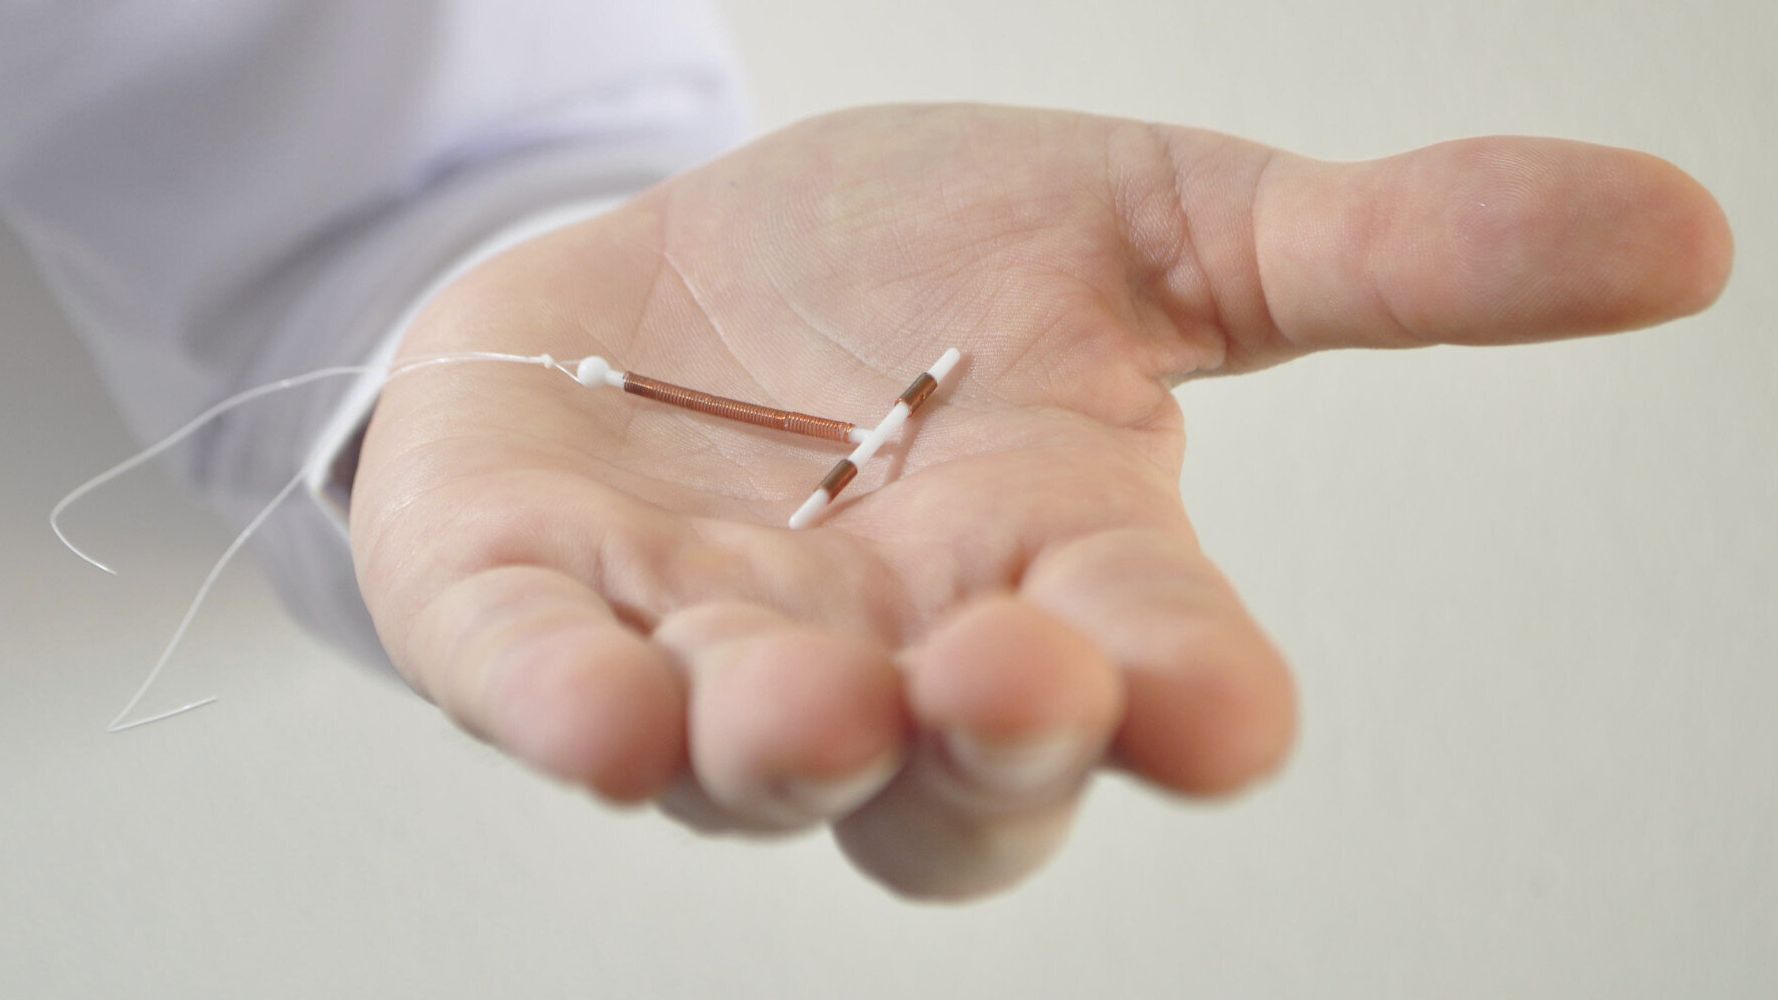 Iud Insert Porn - My Experience With an IUD | HuffPost UK Life